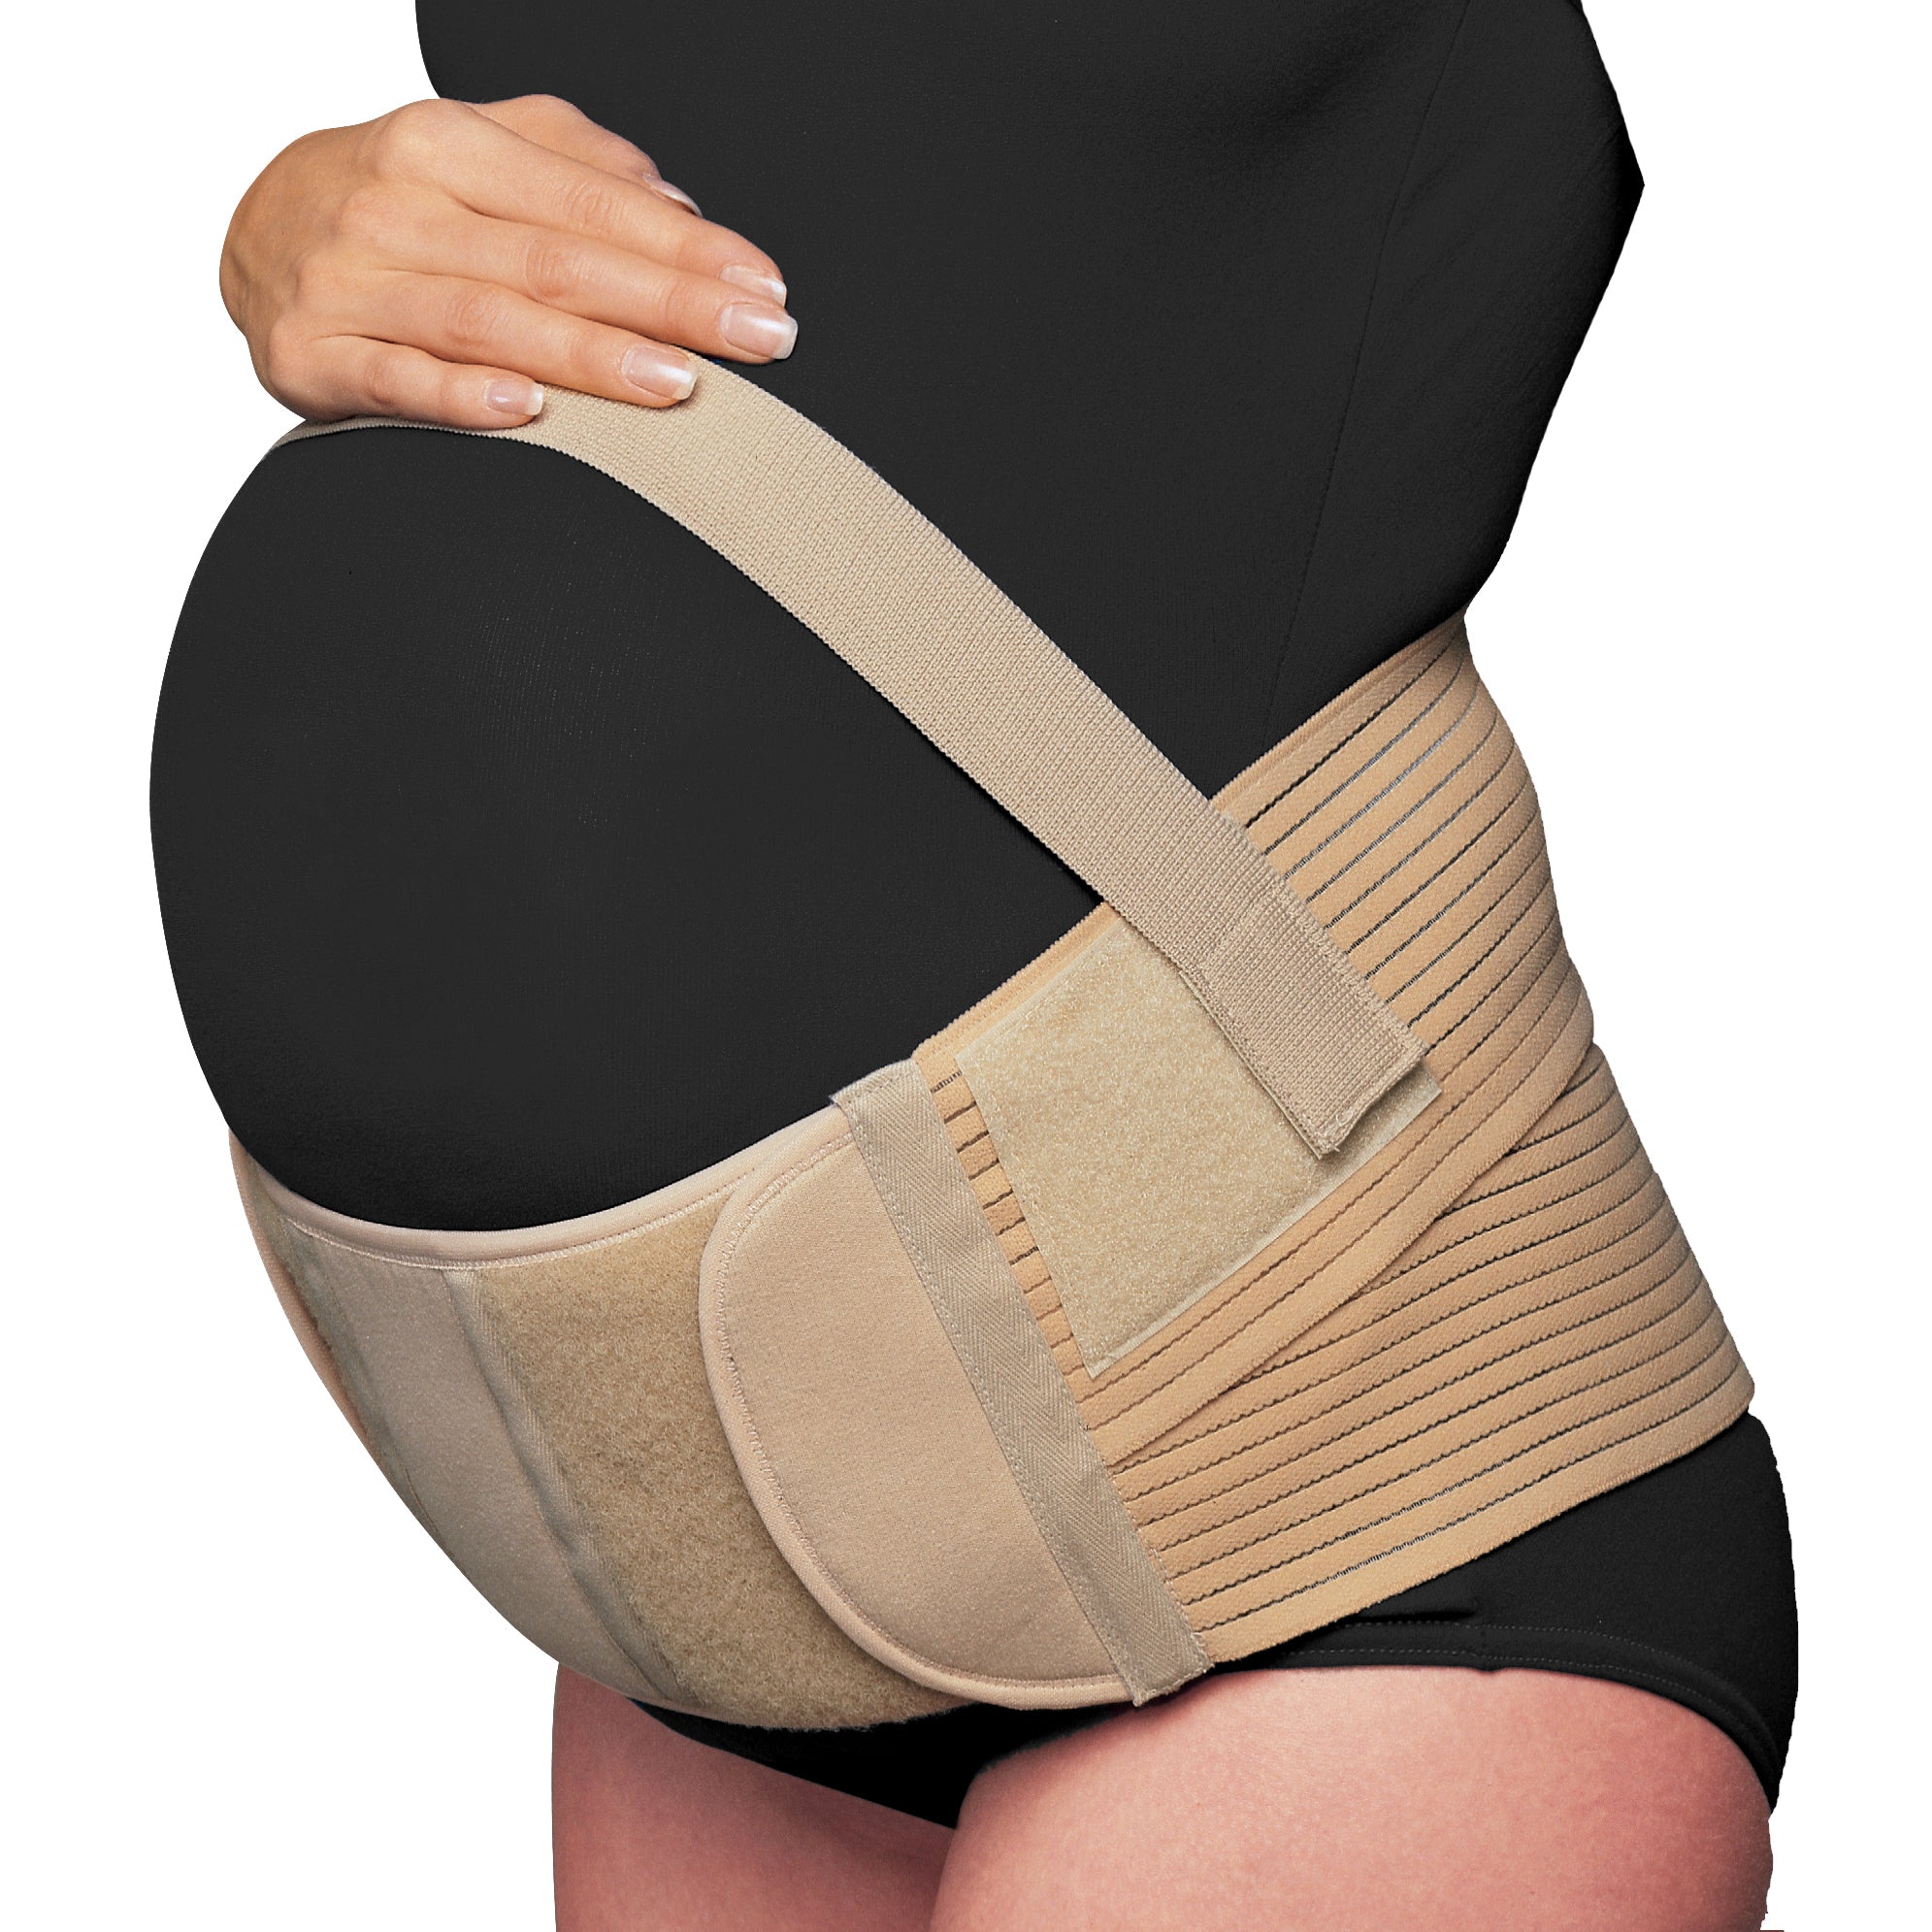 Motherhood Maternity The Ultimate Maternity Belt for Belly Support - Macy's